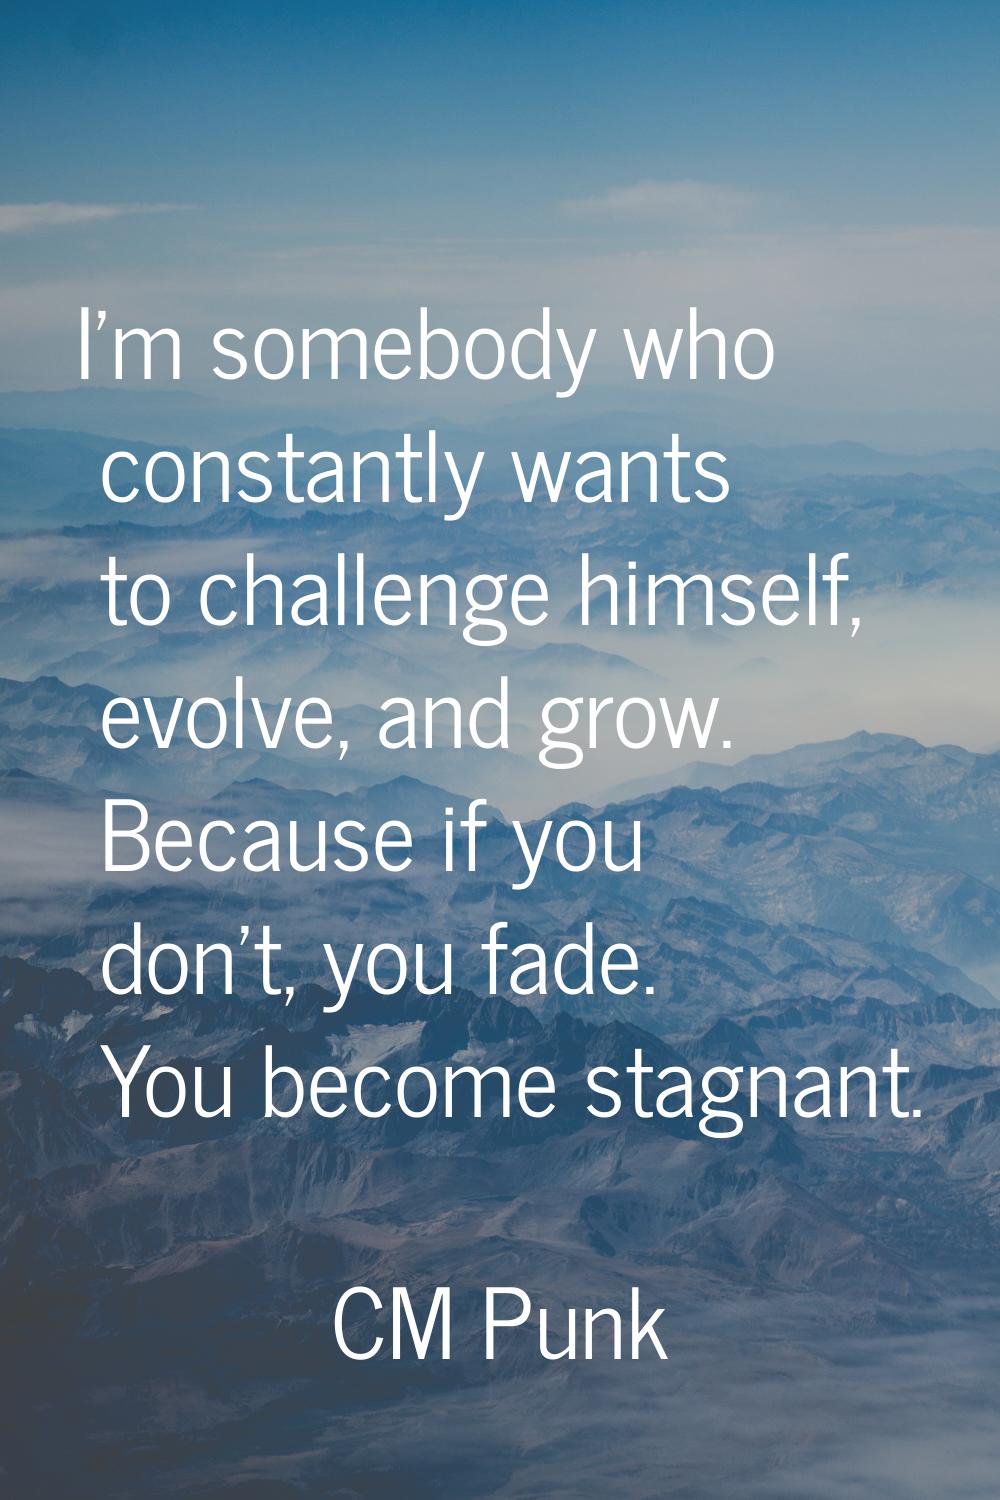 I'm somebody who constantly wants to challenge himself, evolve, and grow. Because if you don't, you